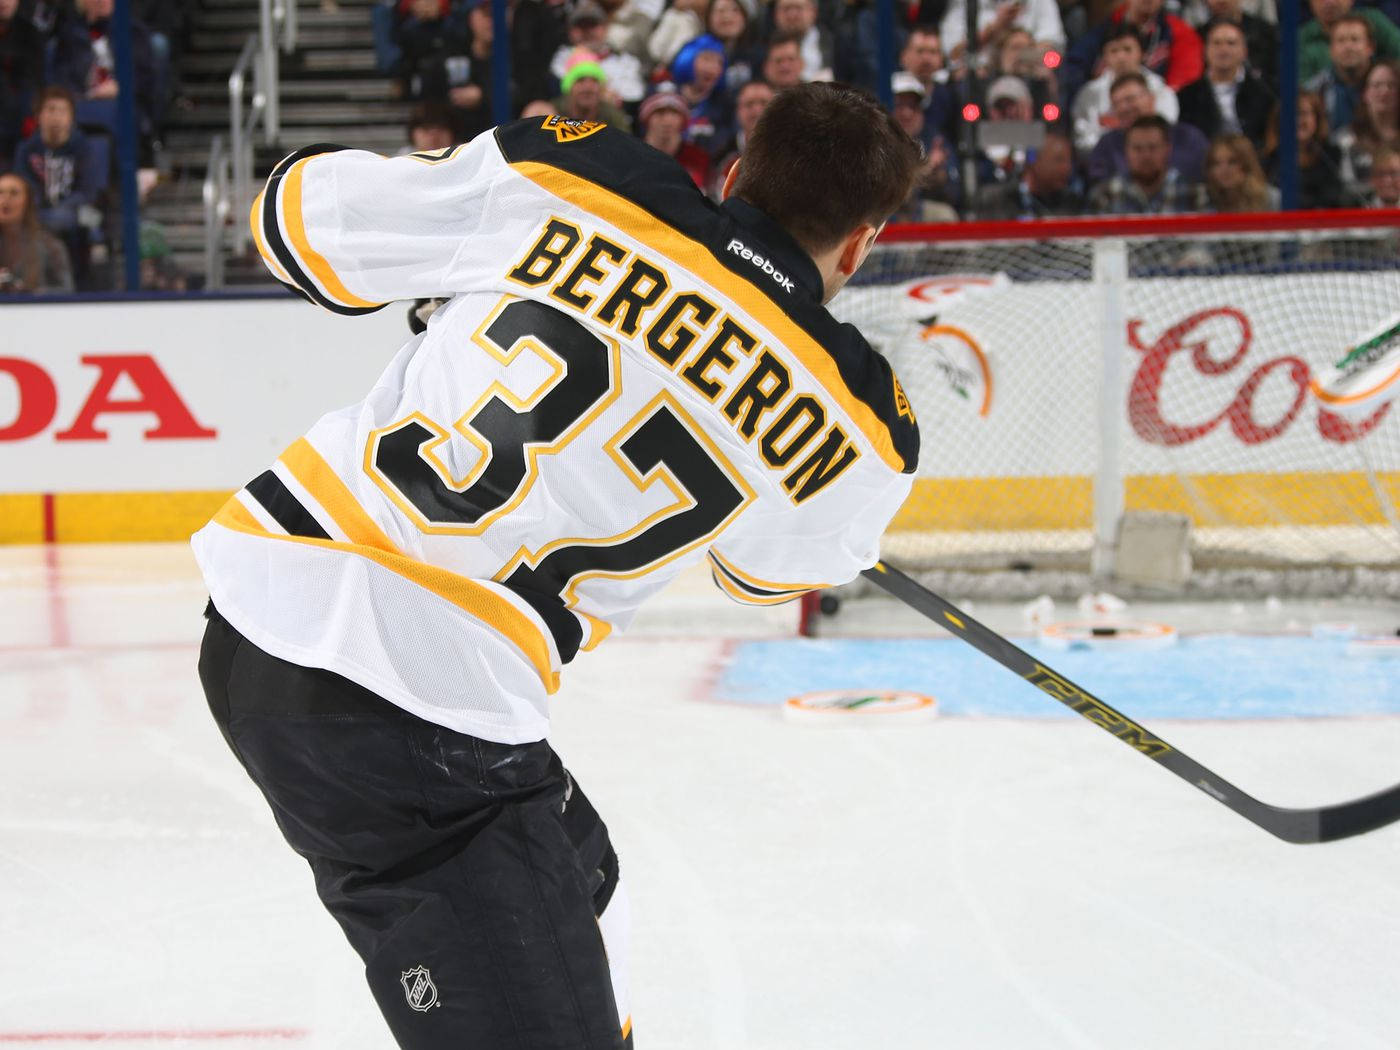 Patrice Bergeron In Action During A Hockey Game